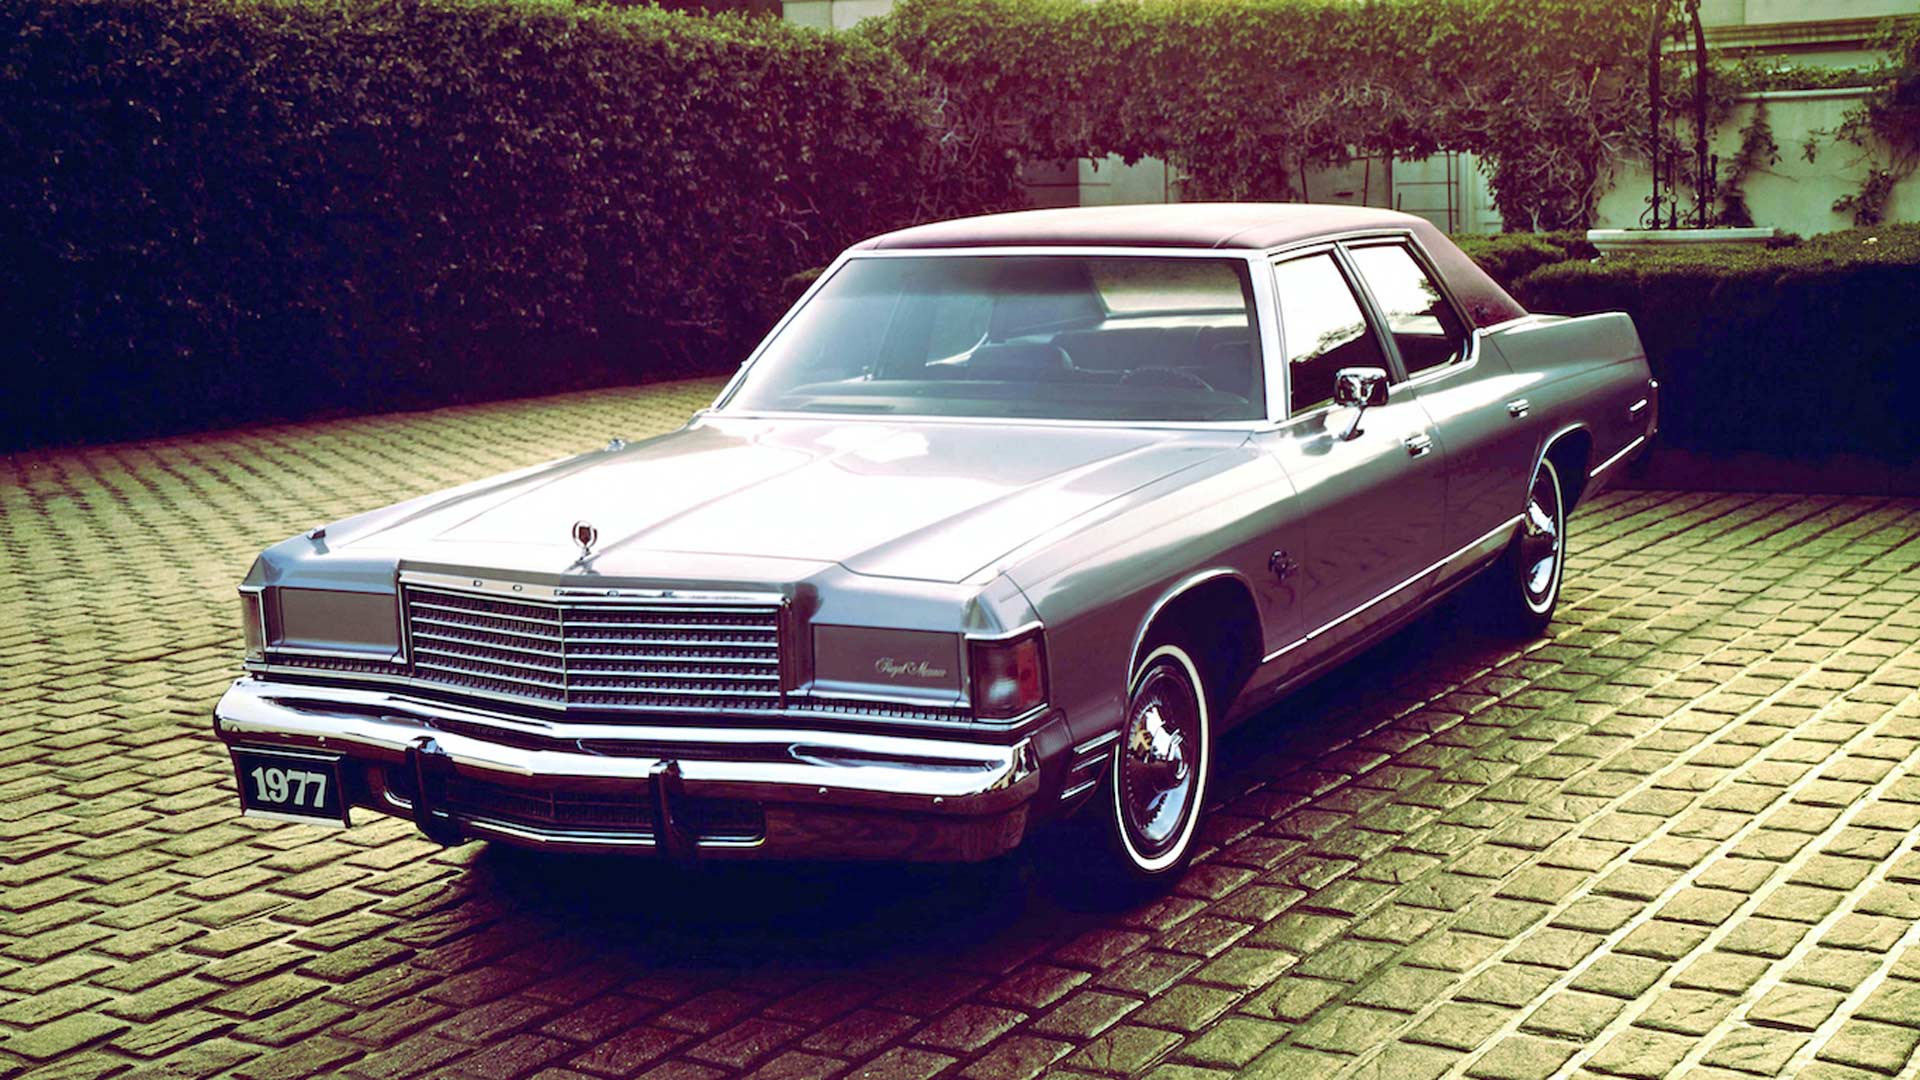 <p>If you were the kind of person who liked traditional value and comfort, combined with an added touch of luxury, then the Royal Monaco was for you in 1977. Slide around on the standard vinyl-upholstered seats, revel at the choice of two ashtrays in both the front and rear passenger compartments, and impress people with your hidden headlights.</p> <p>If you’re really feeling flush, perhaps you might spring for the option of a locking gas cap, or the unmitigated luxury of an electric digital clock.</p>